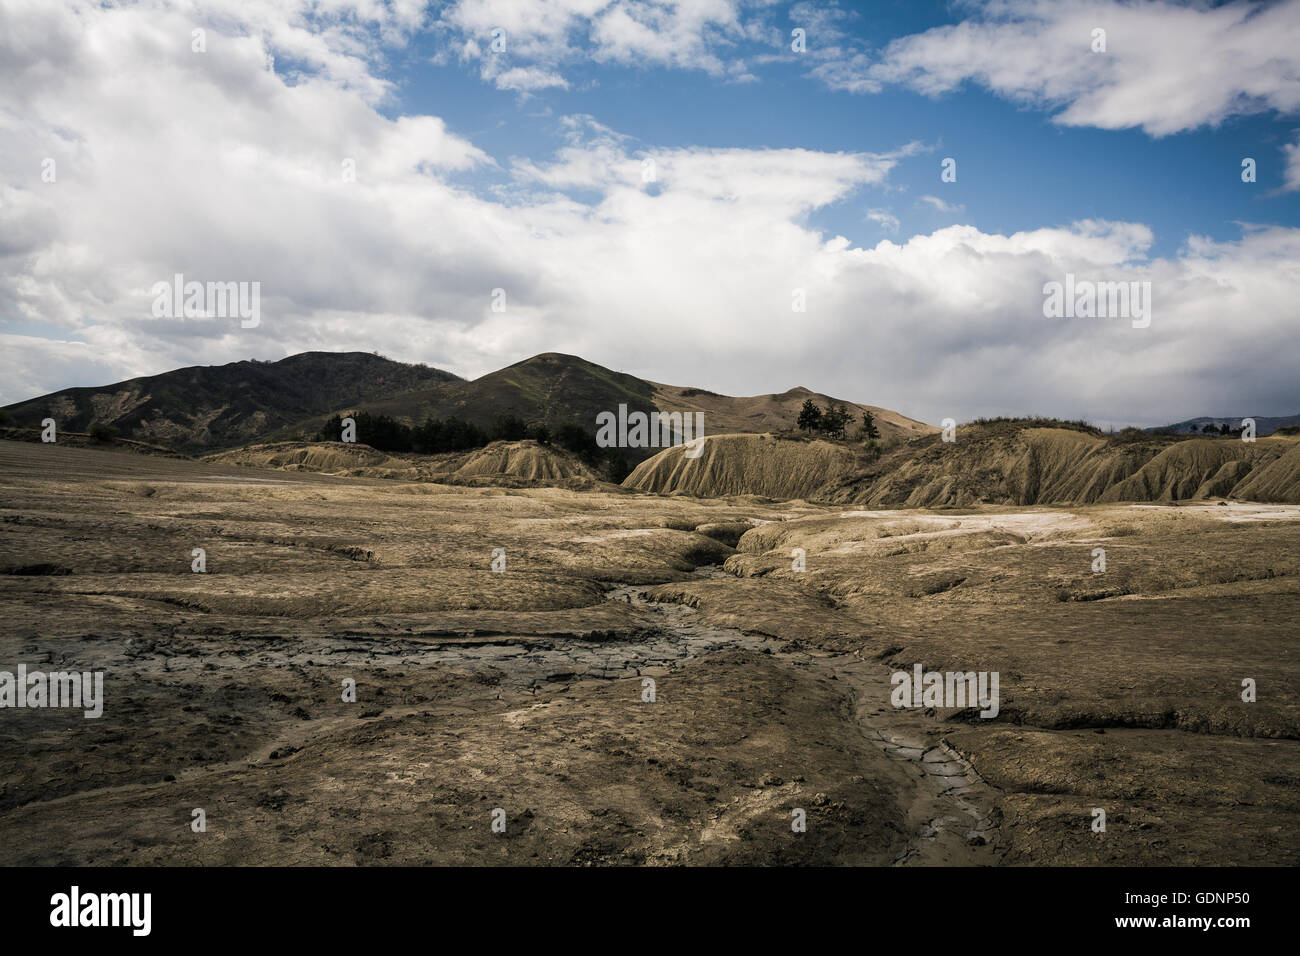 Dramatic Landscape shaped by mud volcanoes under partly cloudy sky Stock Photo